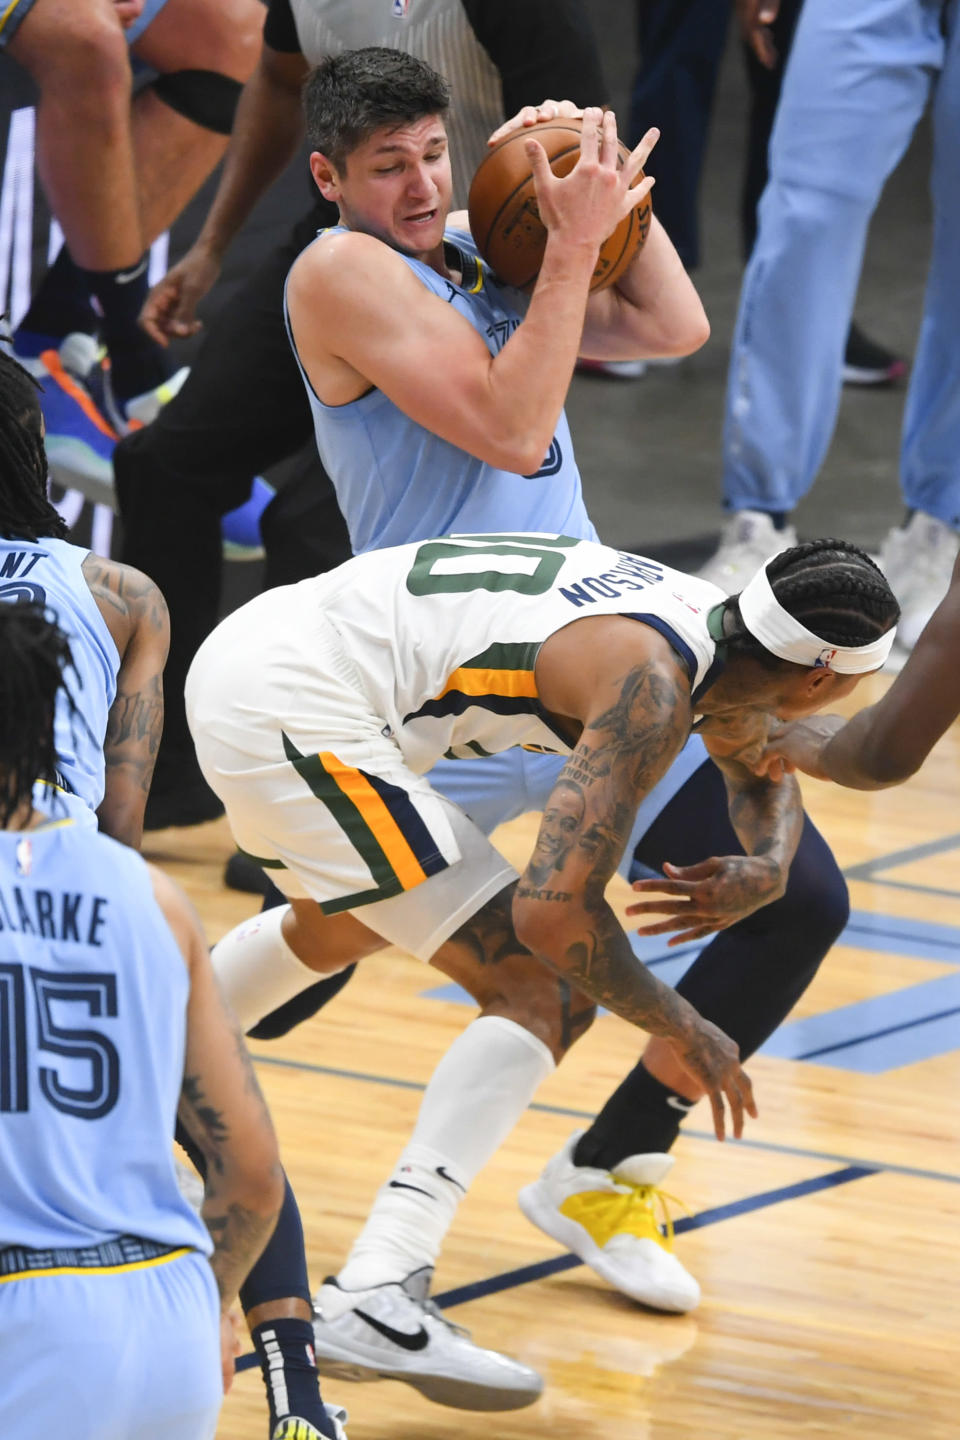 Memphis Grizzlies guard Grayson Allen tries to keep the ball from Utah Jazz guard Jordan Clarkson during the first half of Game 3 of an NBA basketball first-round playoff series Saturday, May 29, 2021, in Memphis, Tenn. (AP Photo/John Amis)